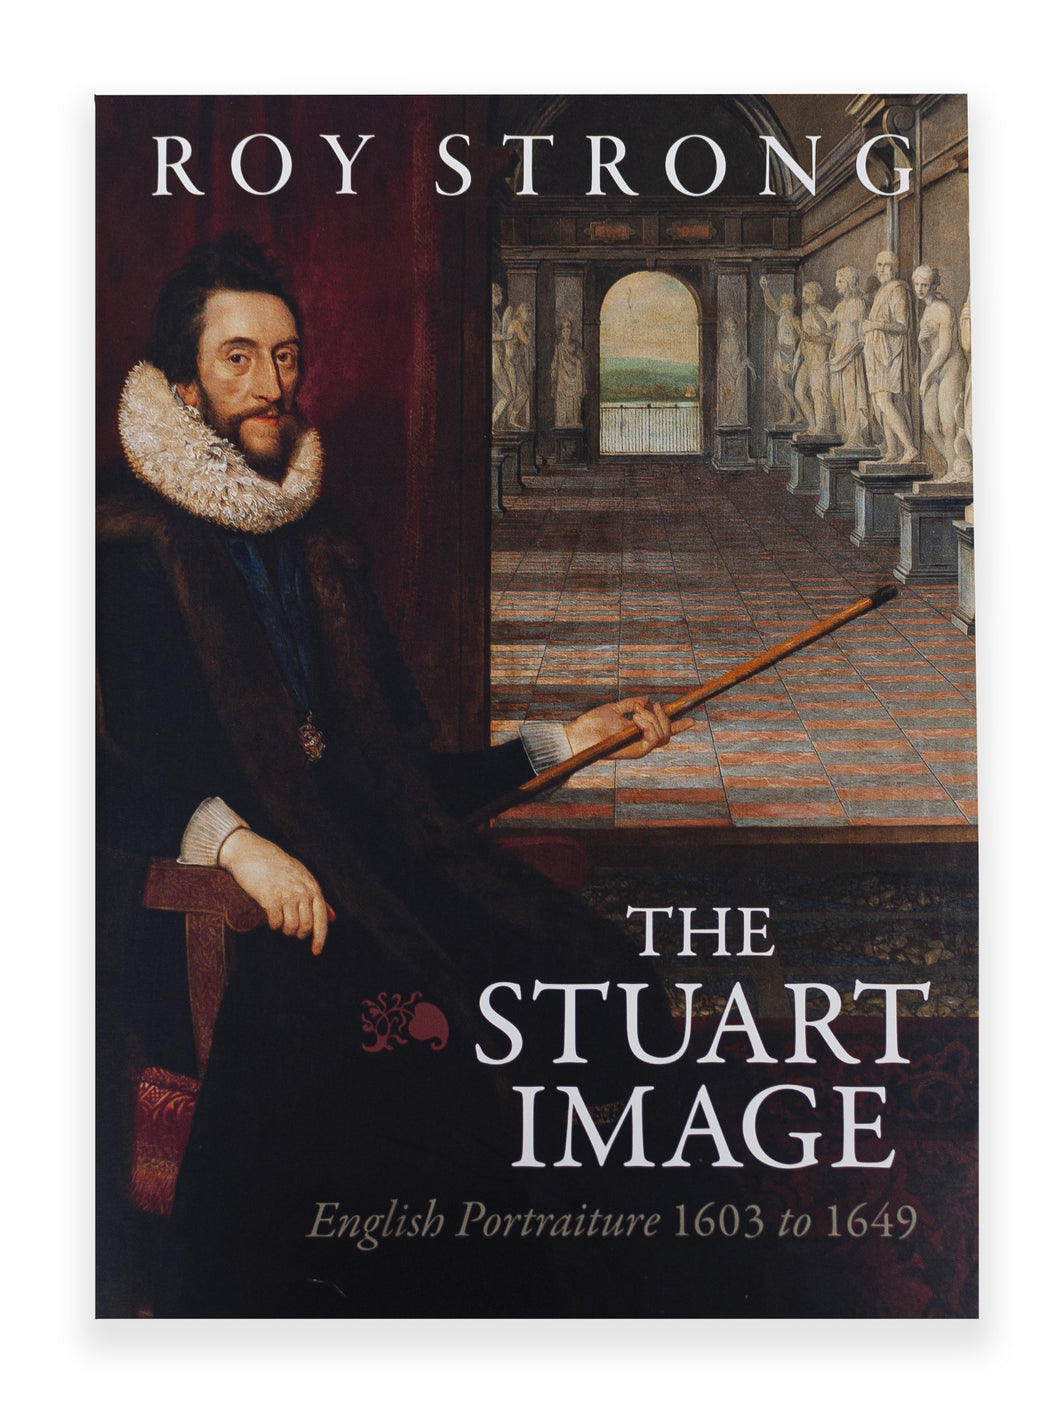 Roy Strong  - The Stuart Image, English Portraiture 1603 - 1649 front cover